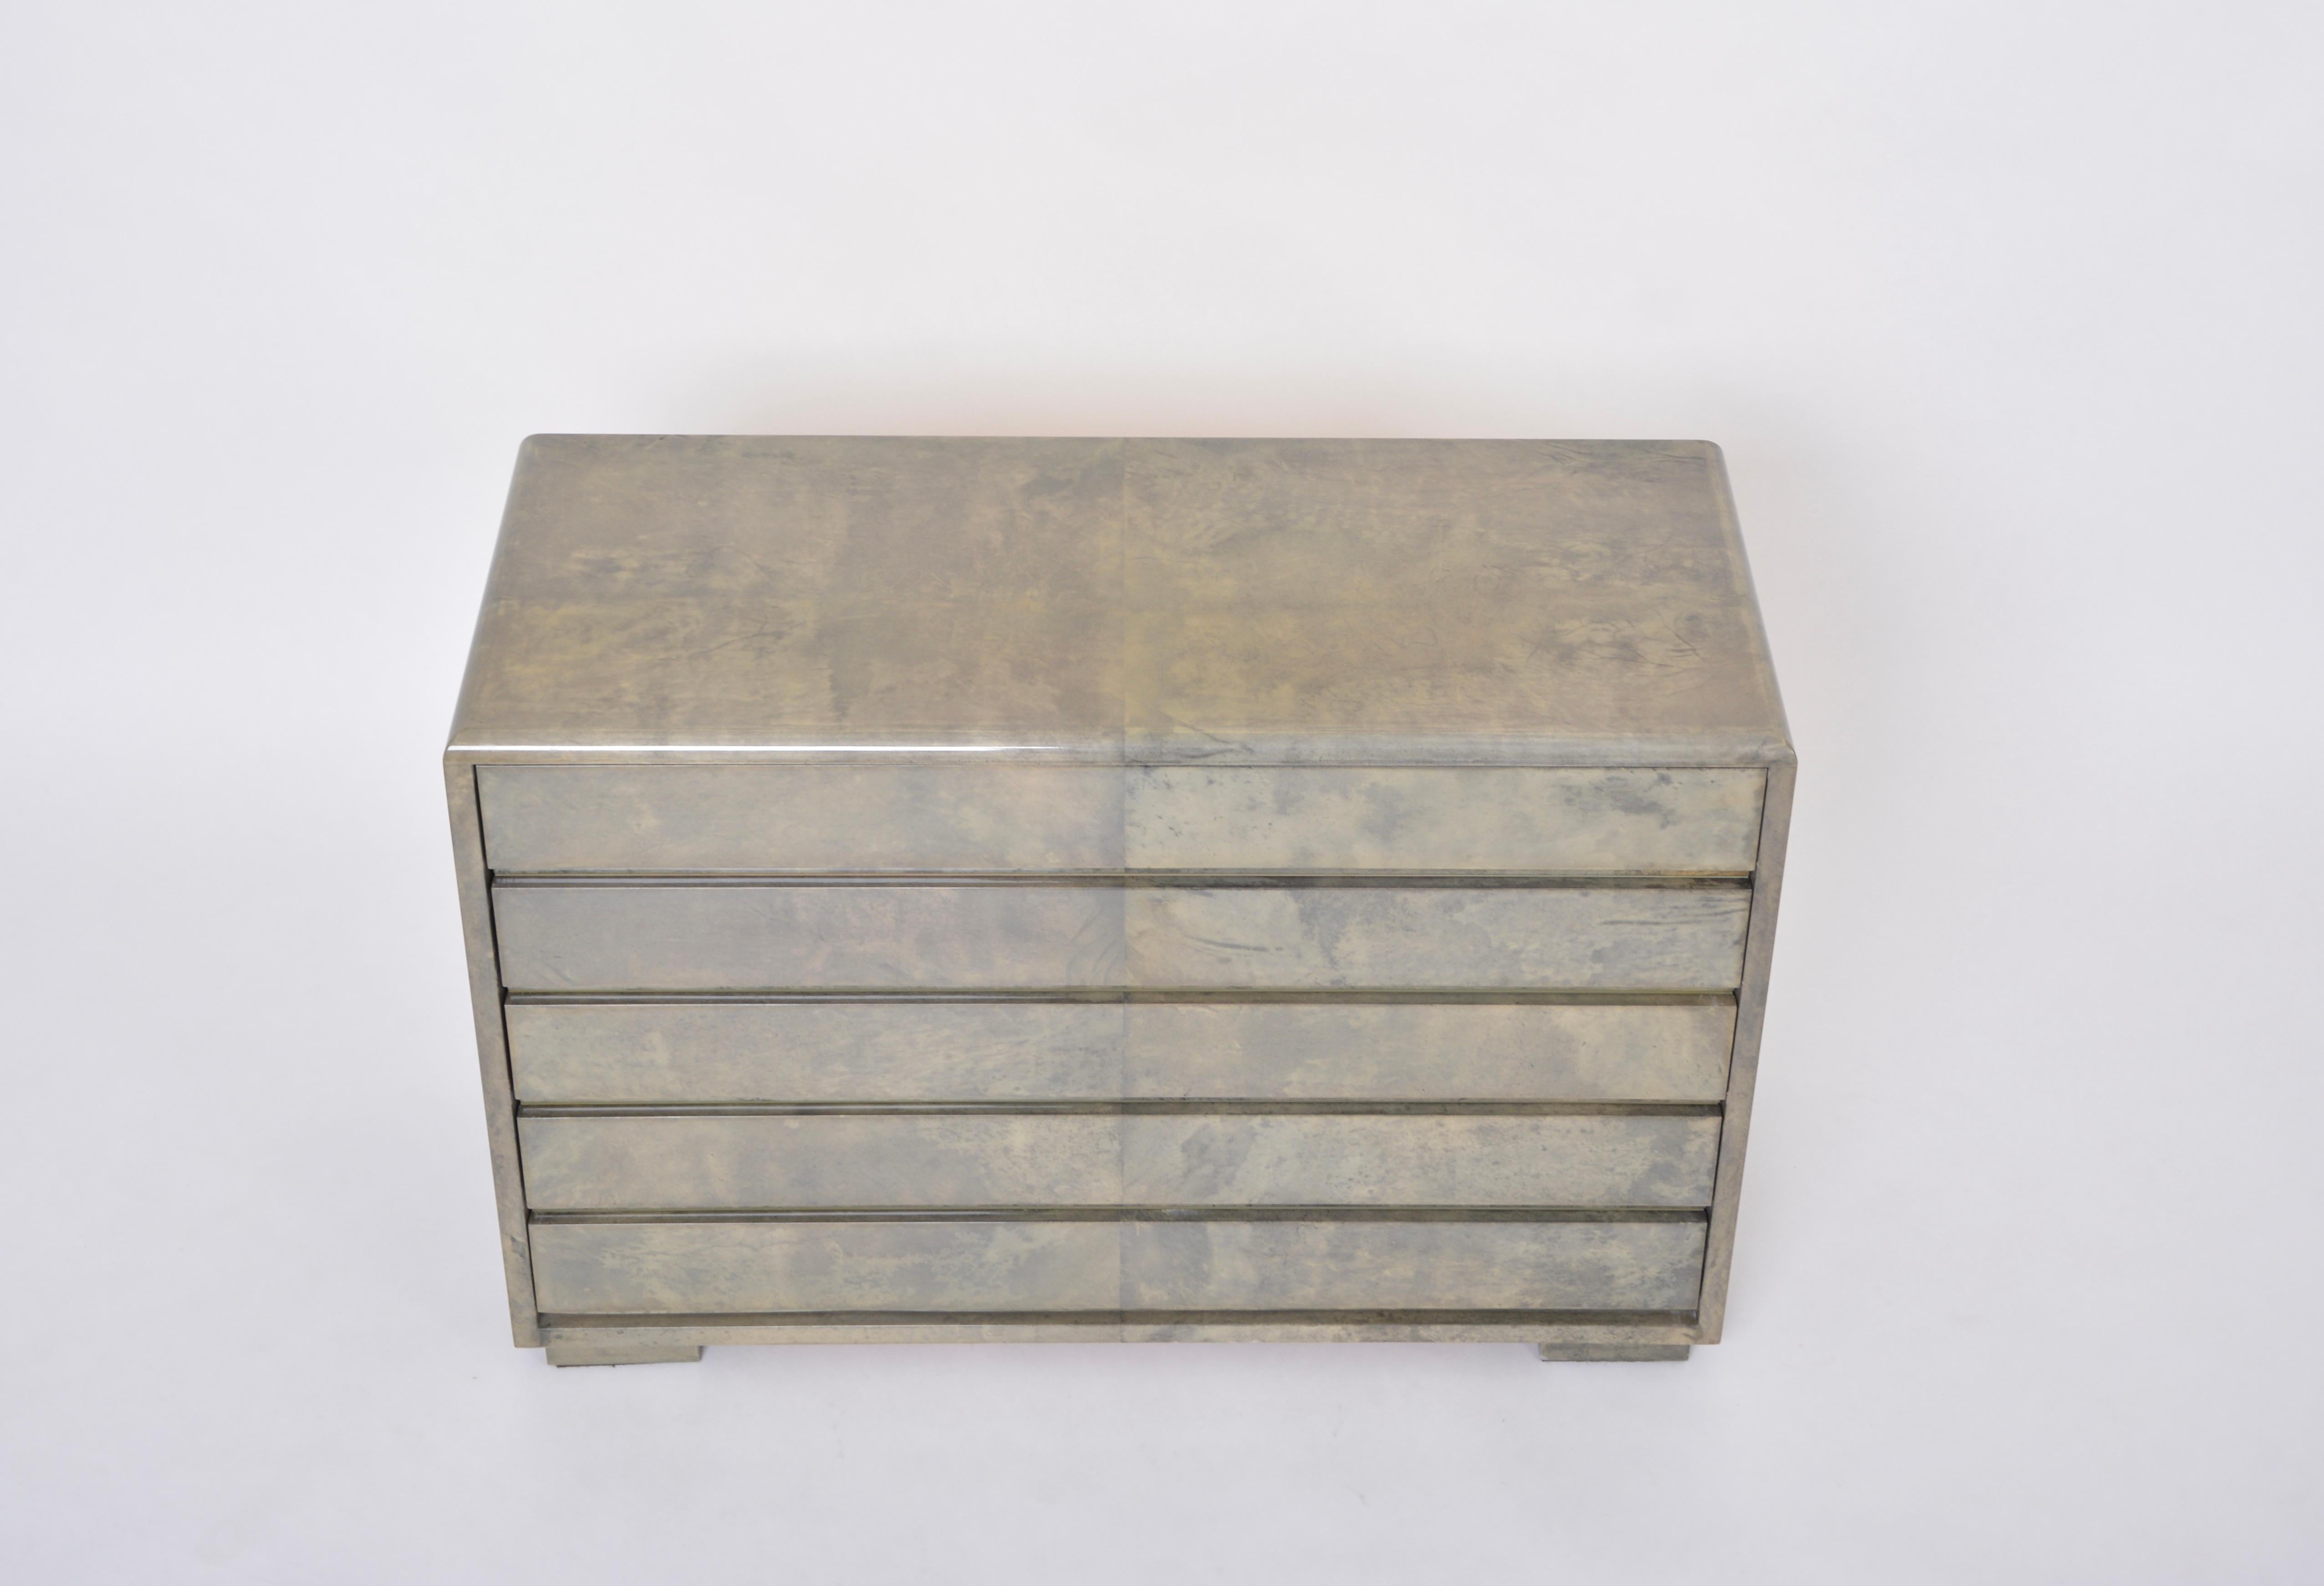 Lacquered Mid-Century Modern Chest of drawers made of laquered Goat Skin by Aldo Tura